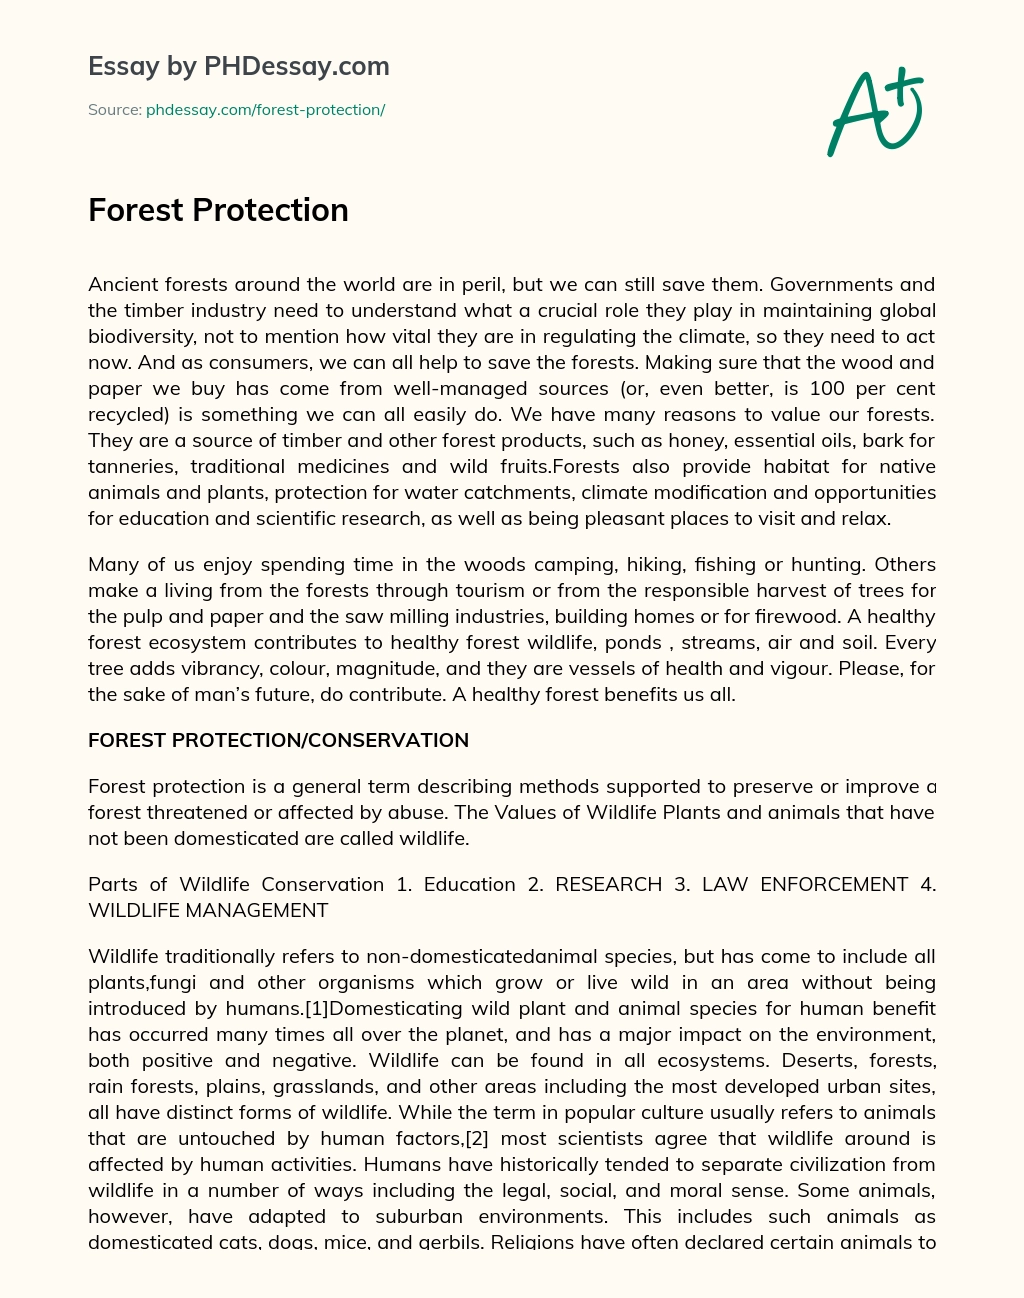 Forest Protection essay